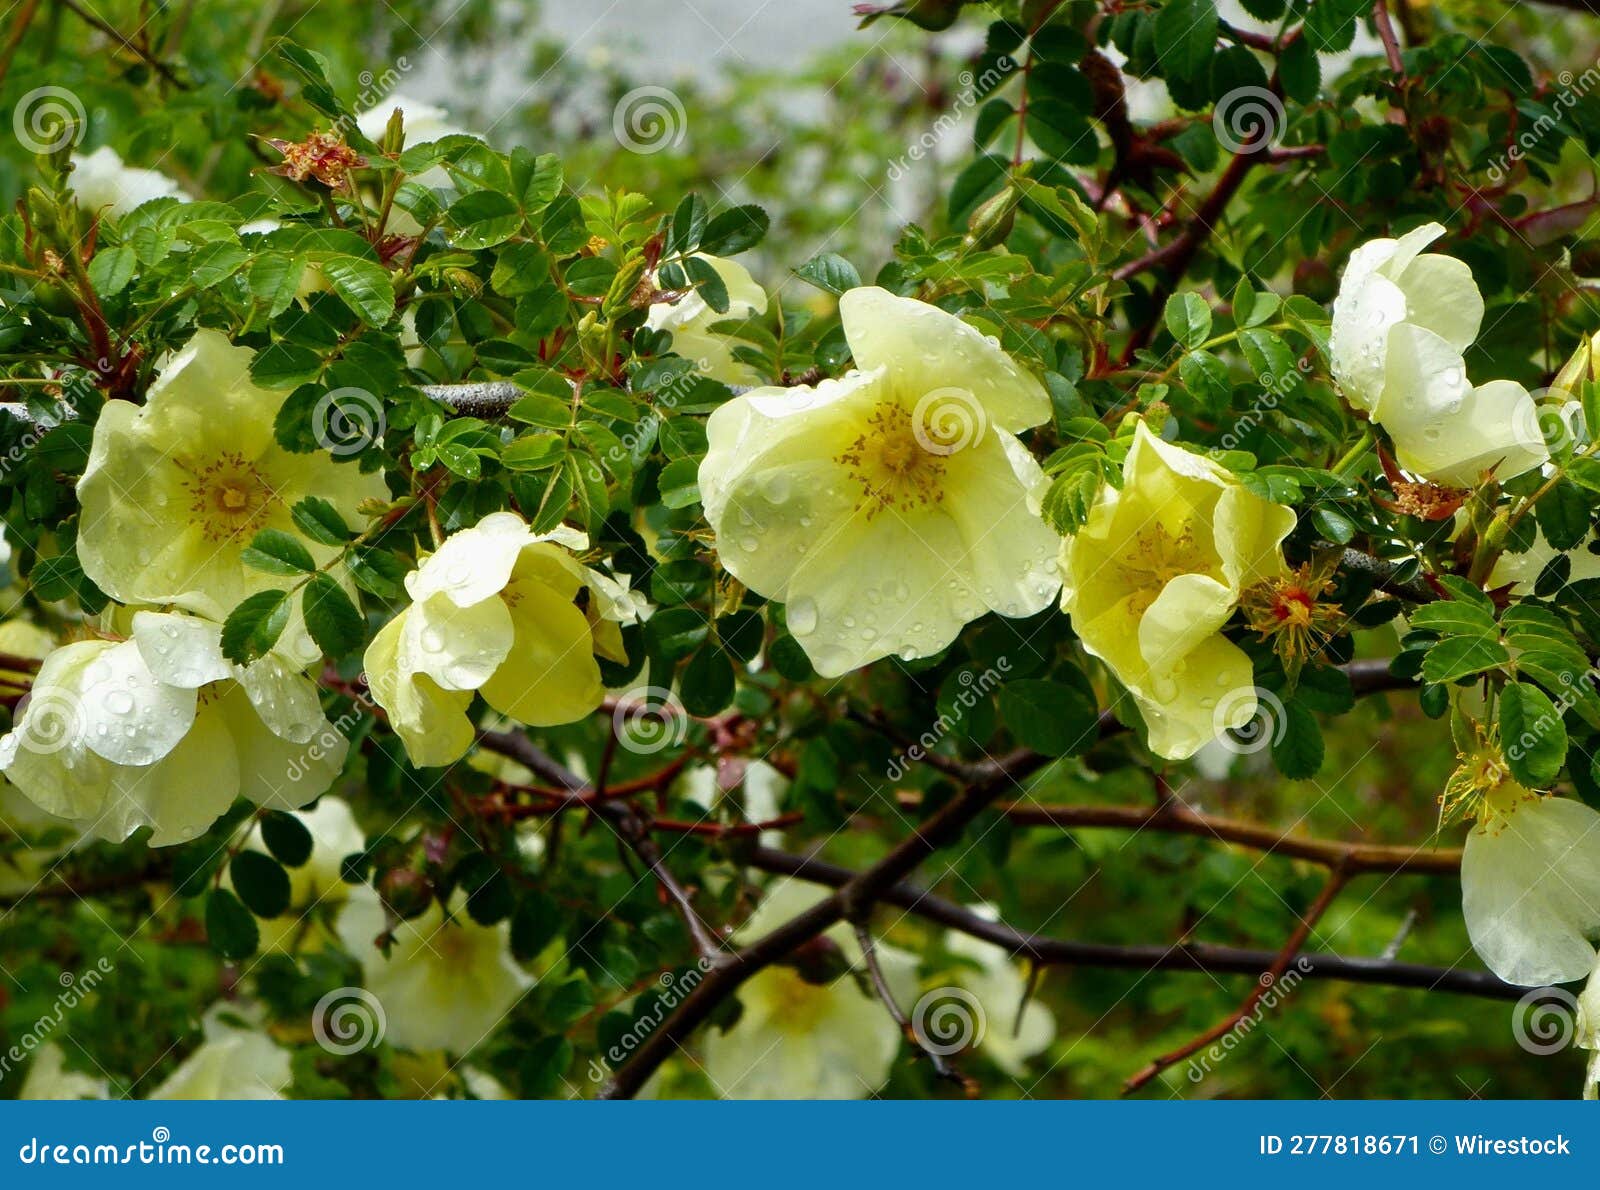 closeup shot of rosa xanthine flowers growing on a tree branch.